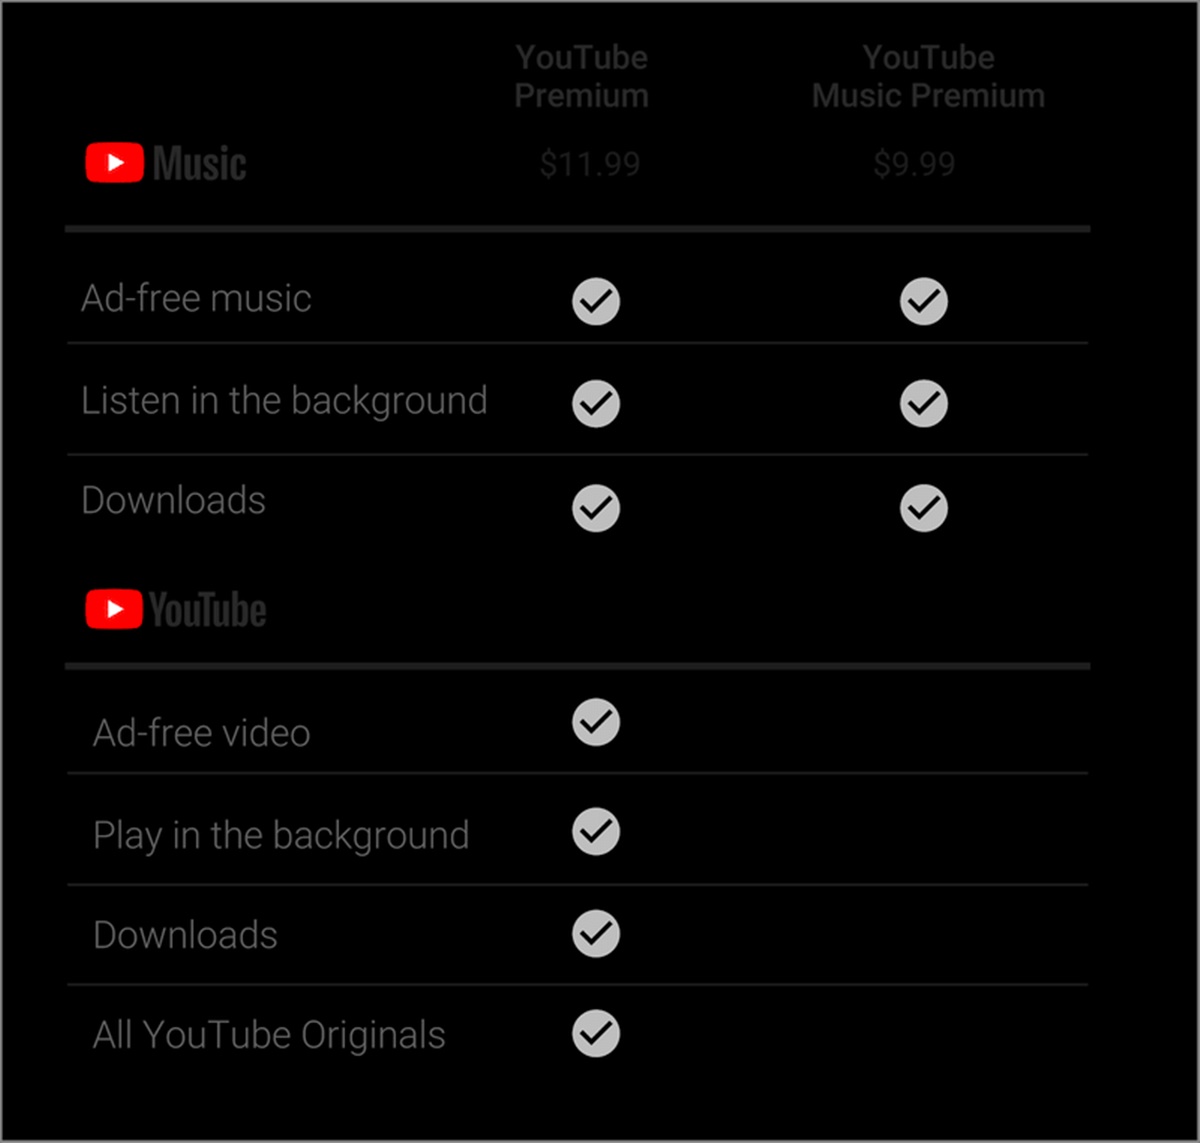 YouTube Premium Vs YouTube Music Premium: What’s The Difference?